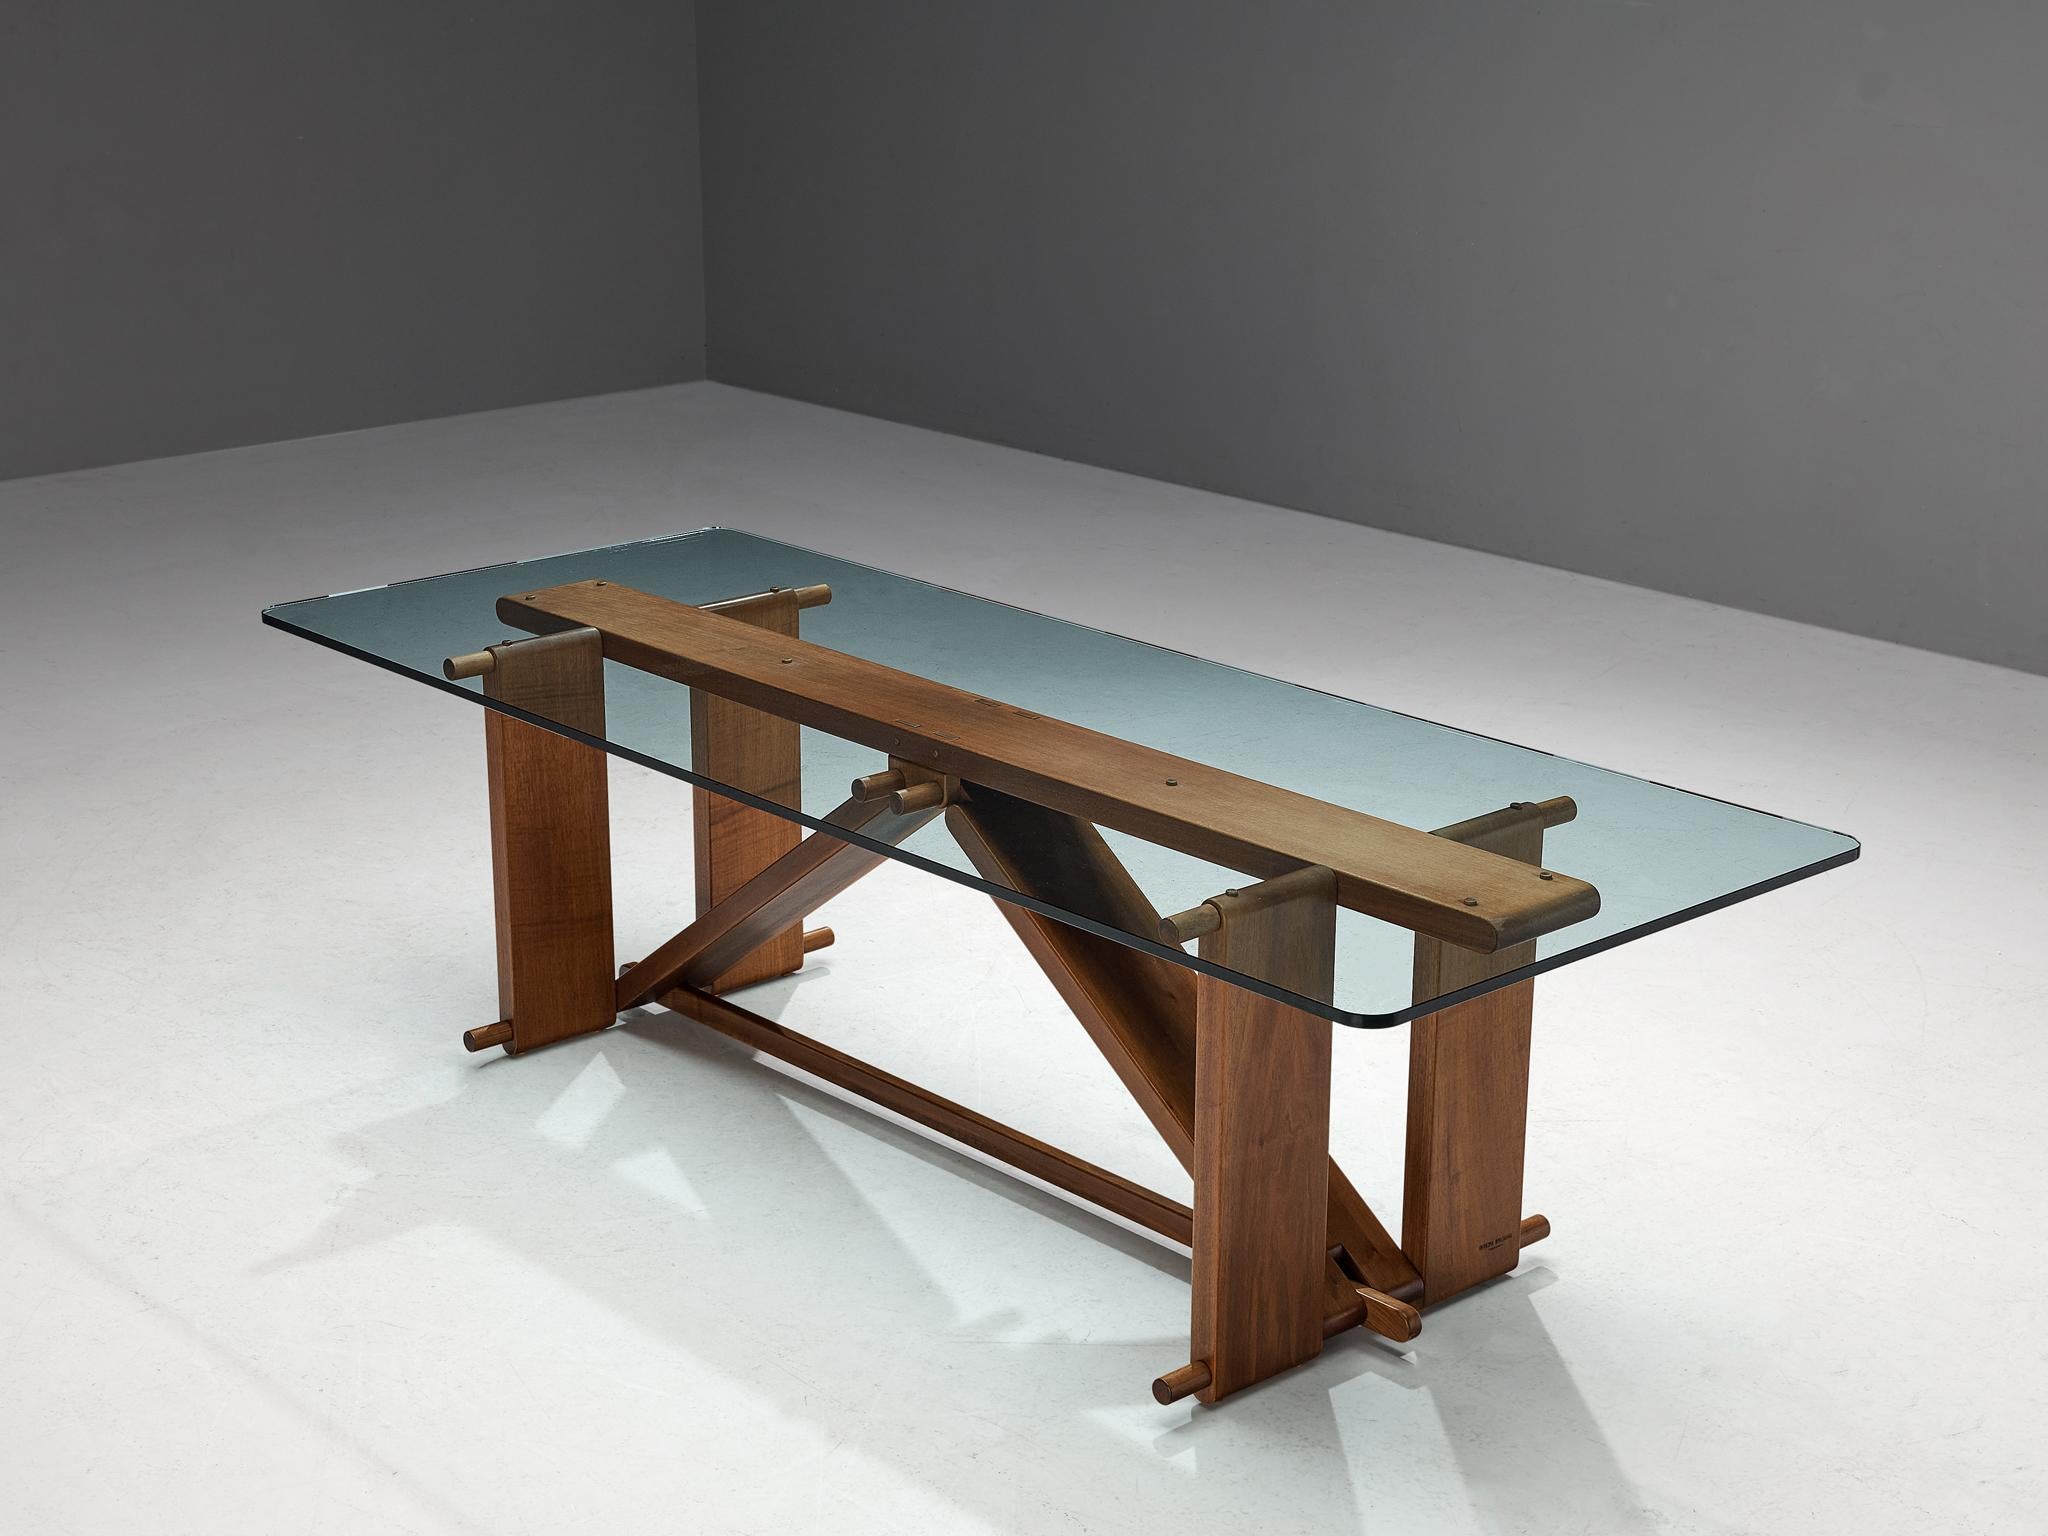 Giuseppe Rivadossi for Officina Rivadossi, dining table model 'Lombardo', walnut, glass, Italy, circa 1986.

Giuseppe Rivadossi once again proves his great eye for materialization and technicality this table is exemplary for. The table is